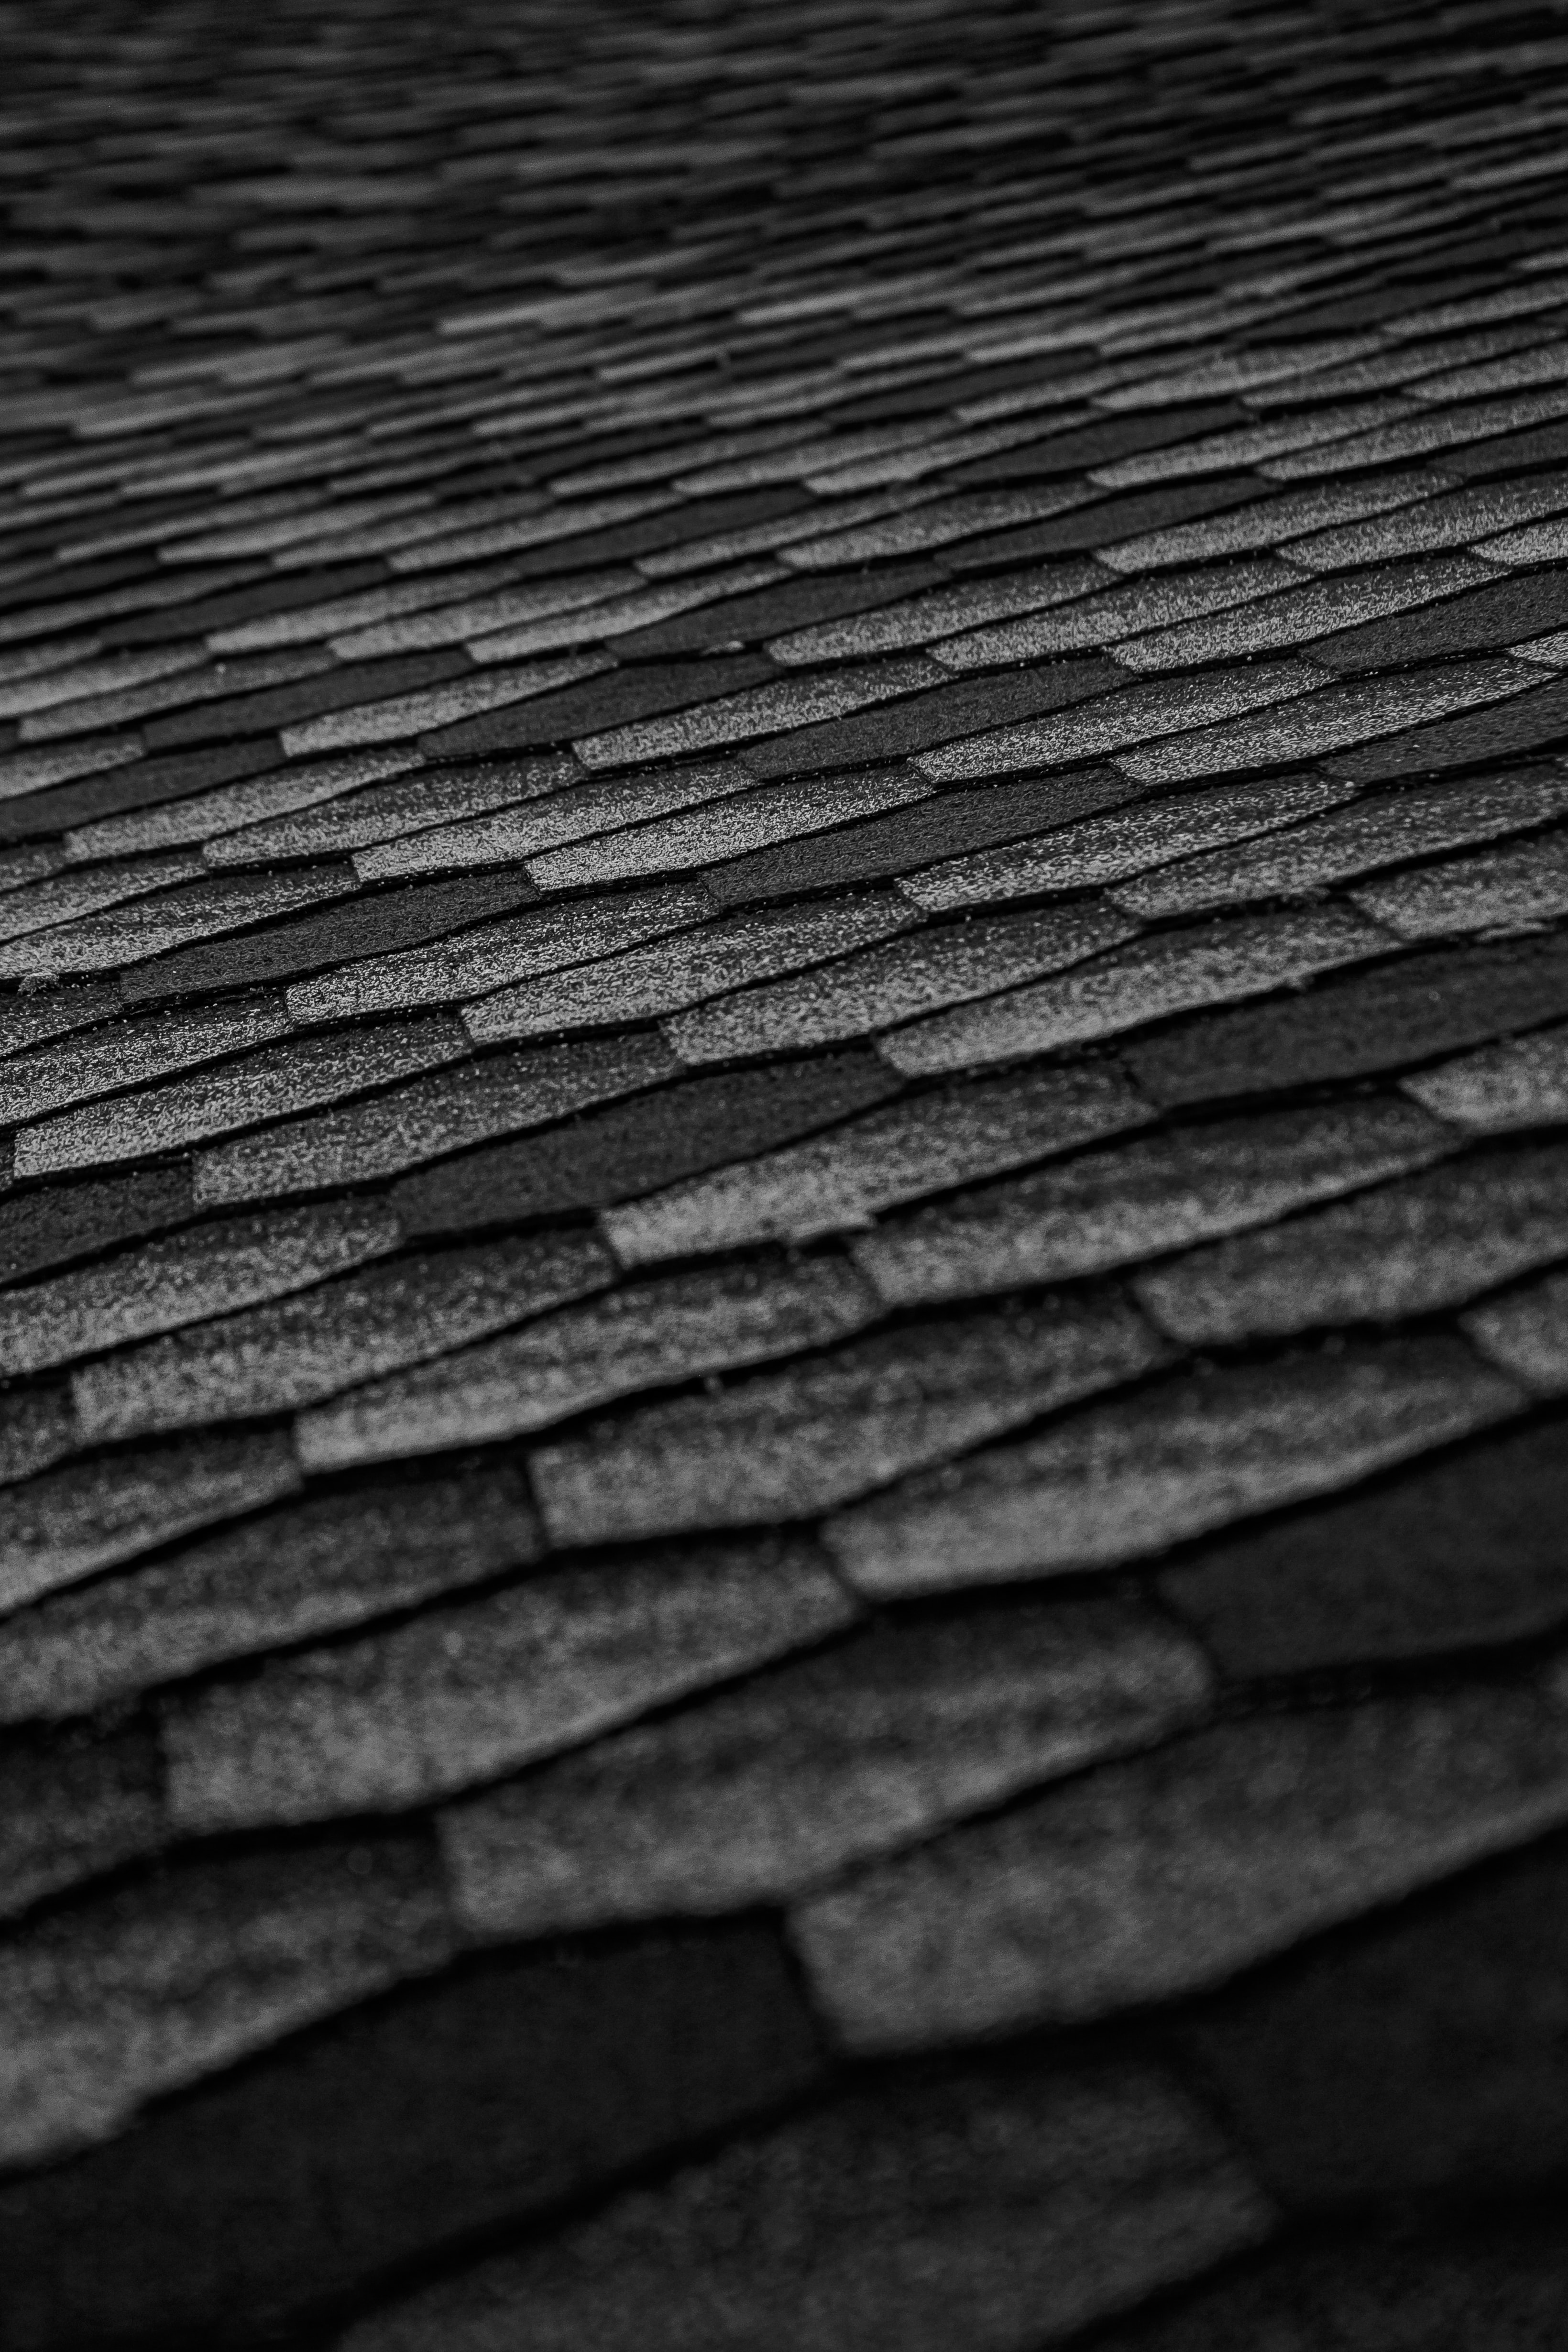 113256 download wallpaper texture, textures, roof, tile, coating, covering, shingles screensavers and pictures for free